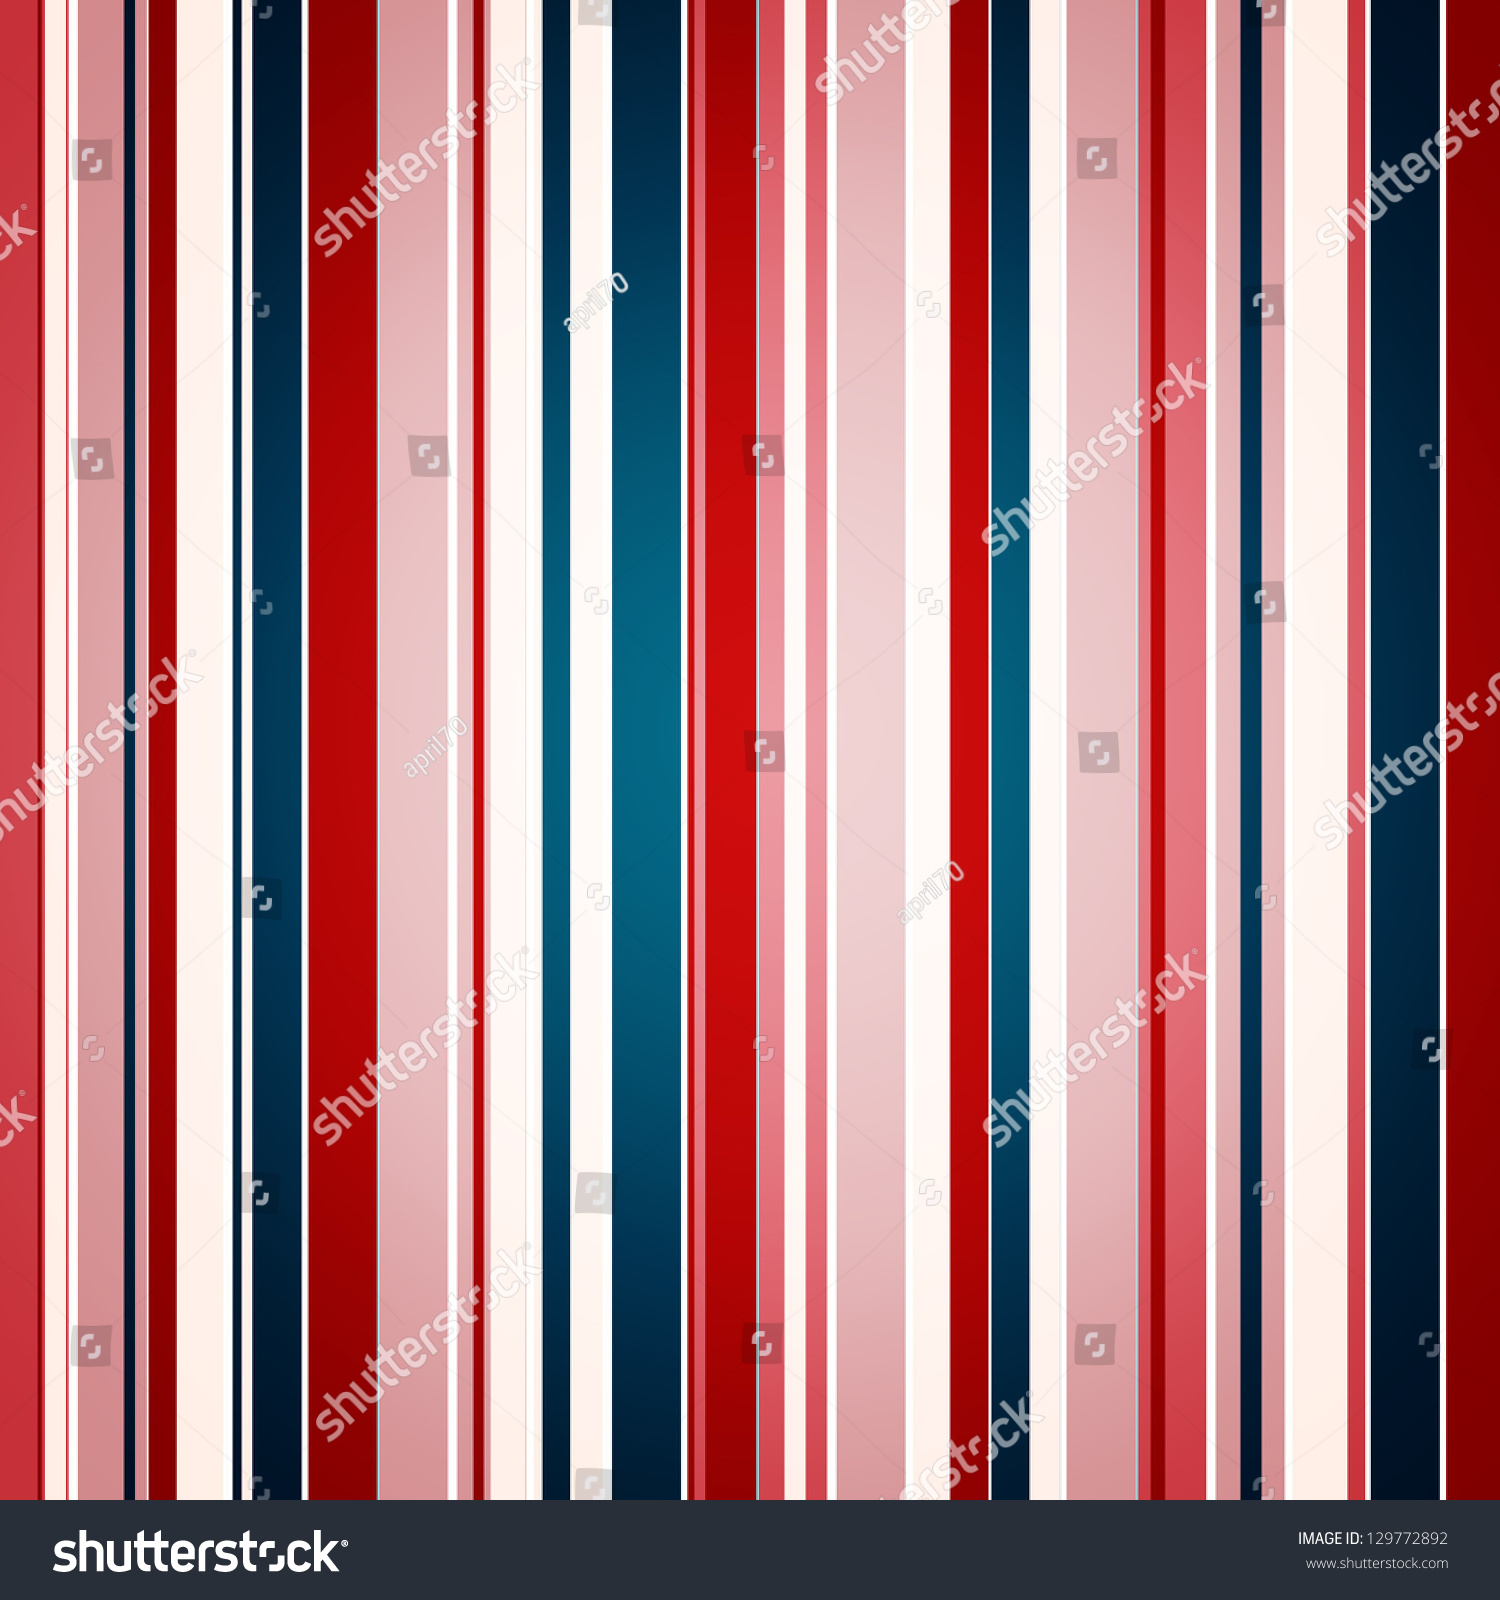 Red, White And Blue Grunge Striped Background Stock Photo 129772892